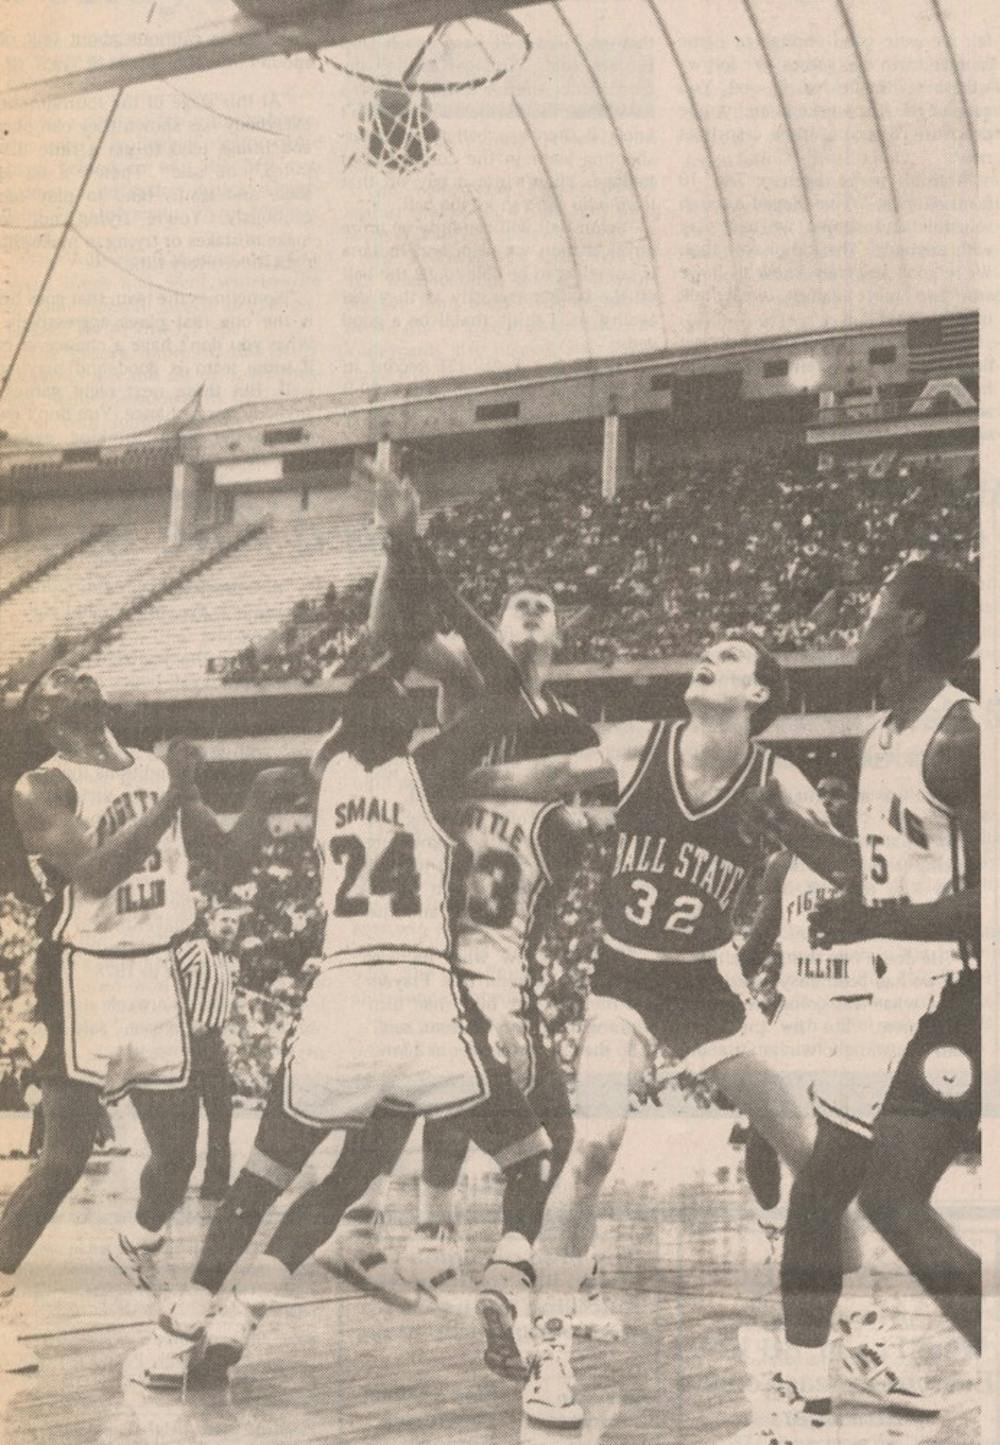 <p>Greg Miller puts up a shot as Roman Muller fights for rebounding position in a 1989 game. Miller and Muller were two of nine seniors on the 1990 team that went to the Sweet 16. This photo was printed in the March 21, 1989 Daily News edition.</p>